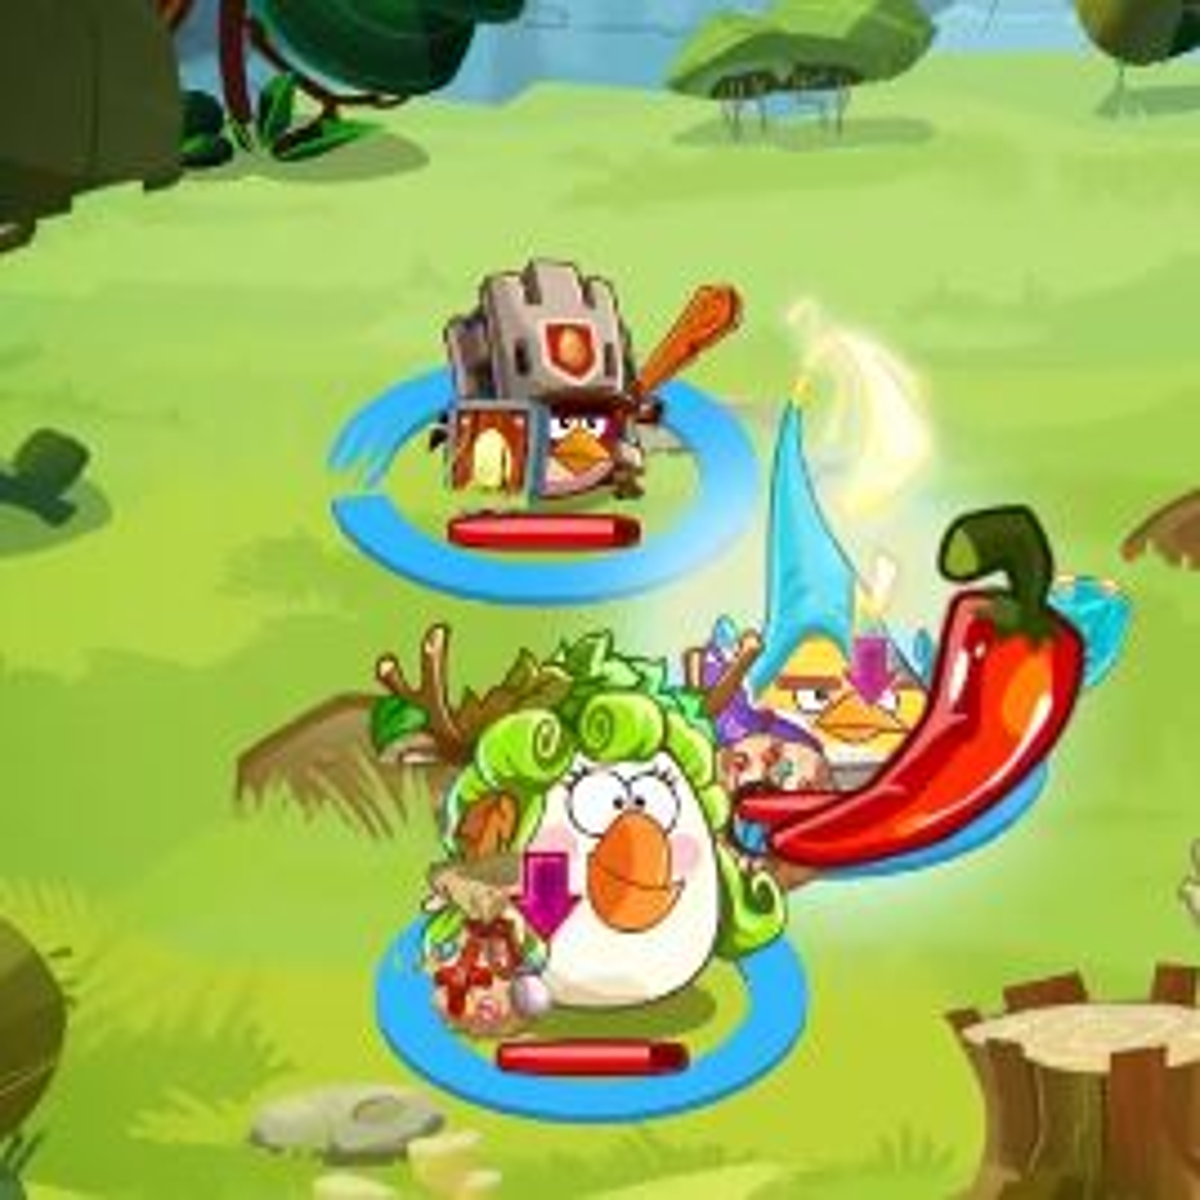 Angry Birds Epic' for iOS, Android and Windows Phone game review